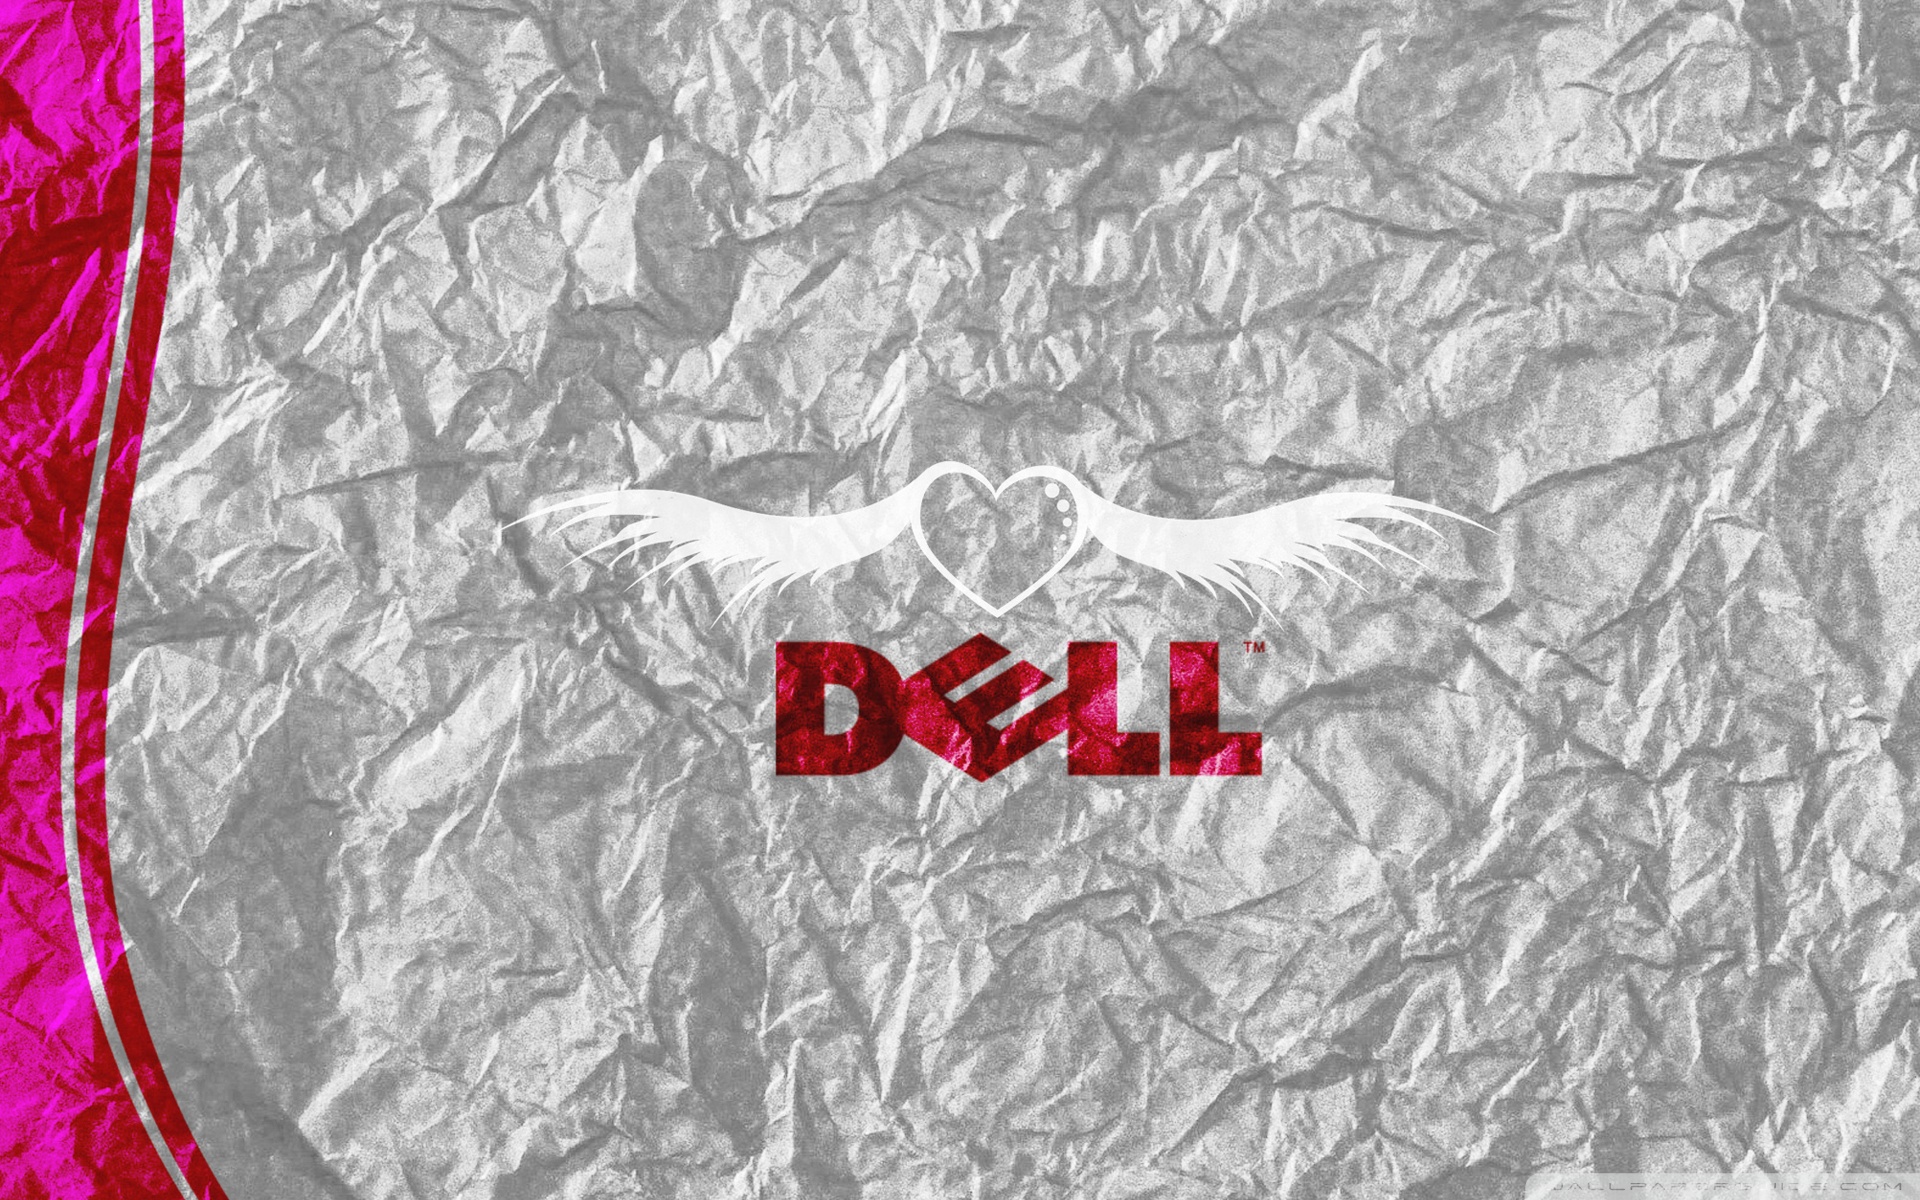 Dell Hd Wallpapers 1080p For Laptop - HD Wallpaper 